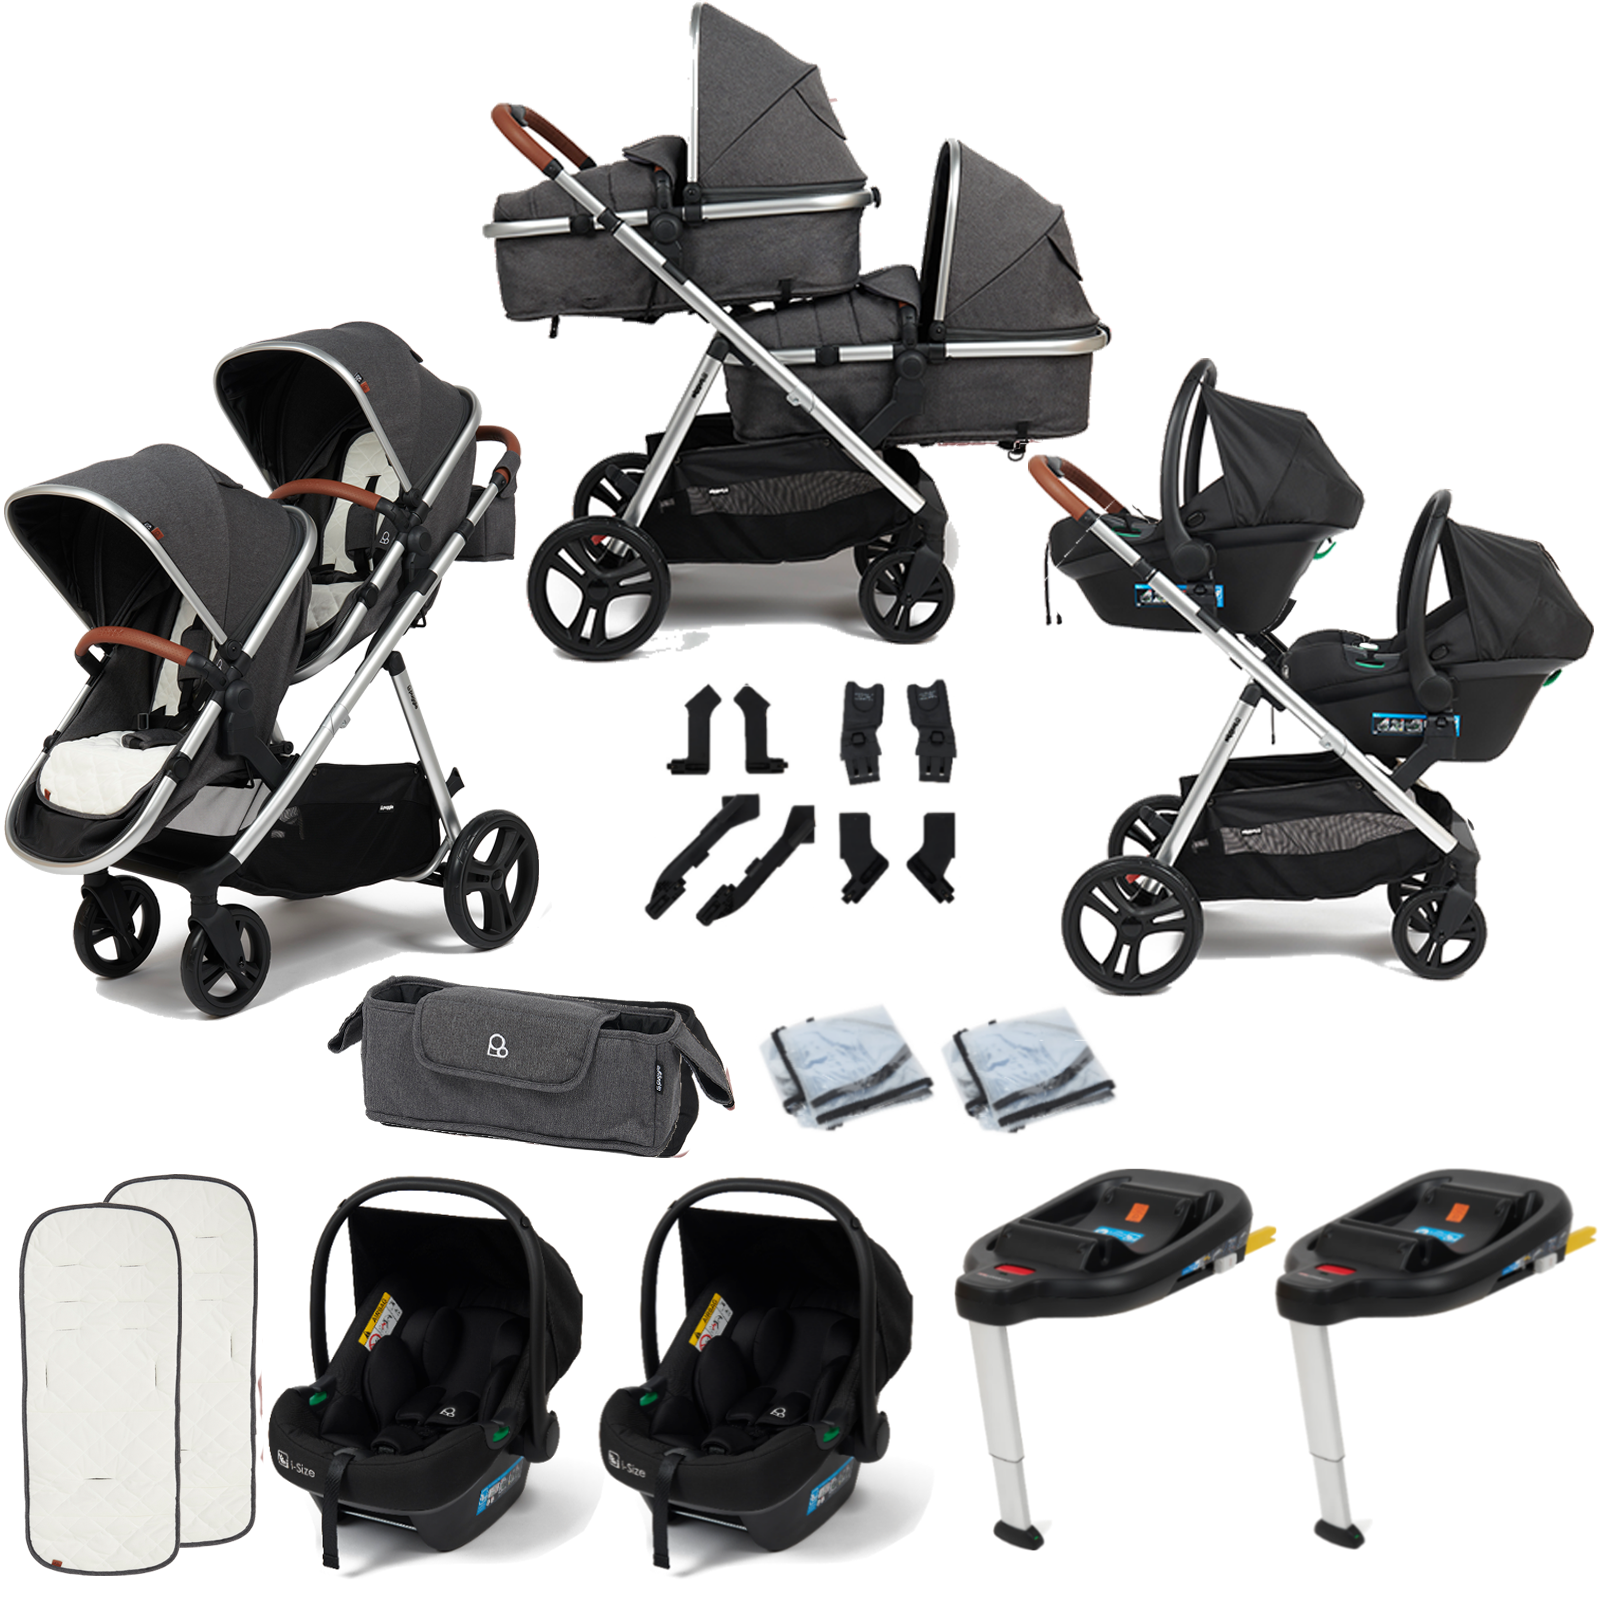 Puggle Memphis 2-in-1 Duo i-Size Double Twin Travel System with x2 ISOFIX Bases - Platinum Grey (Chrome Frame)